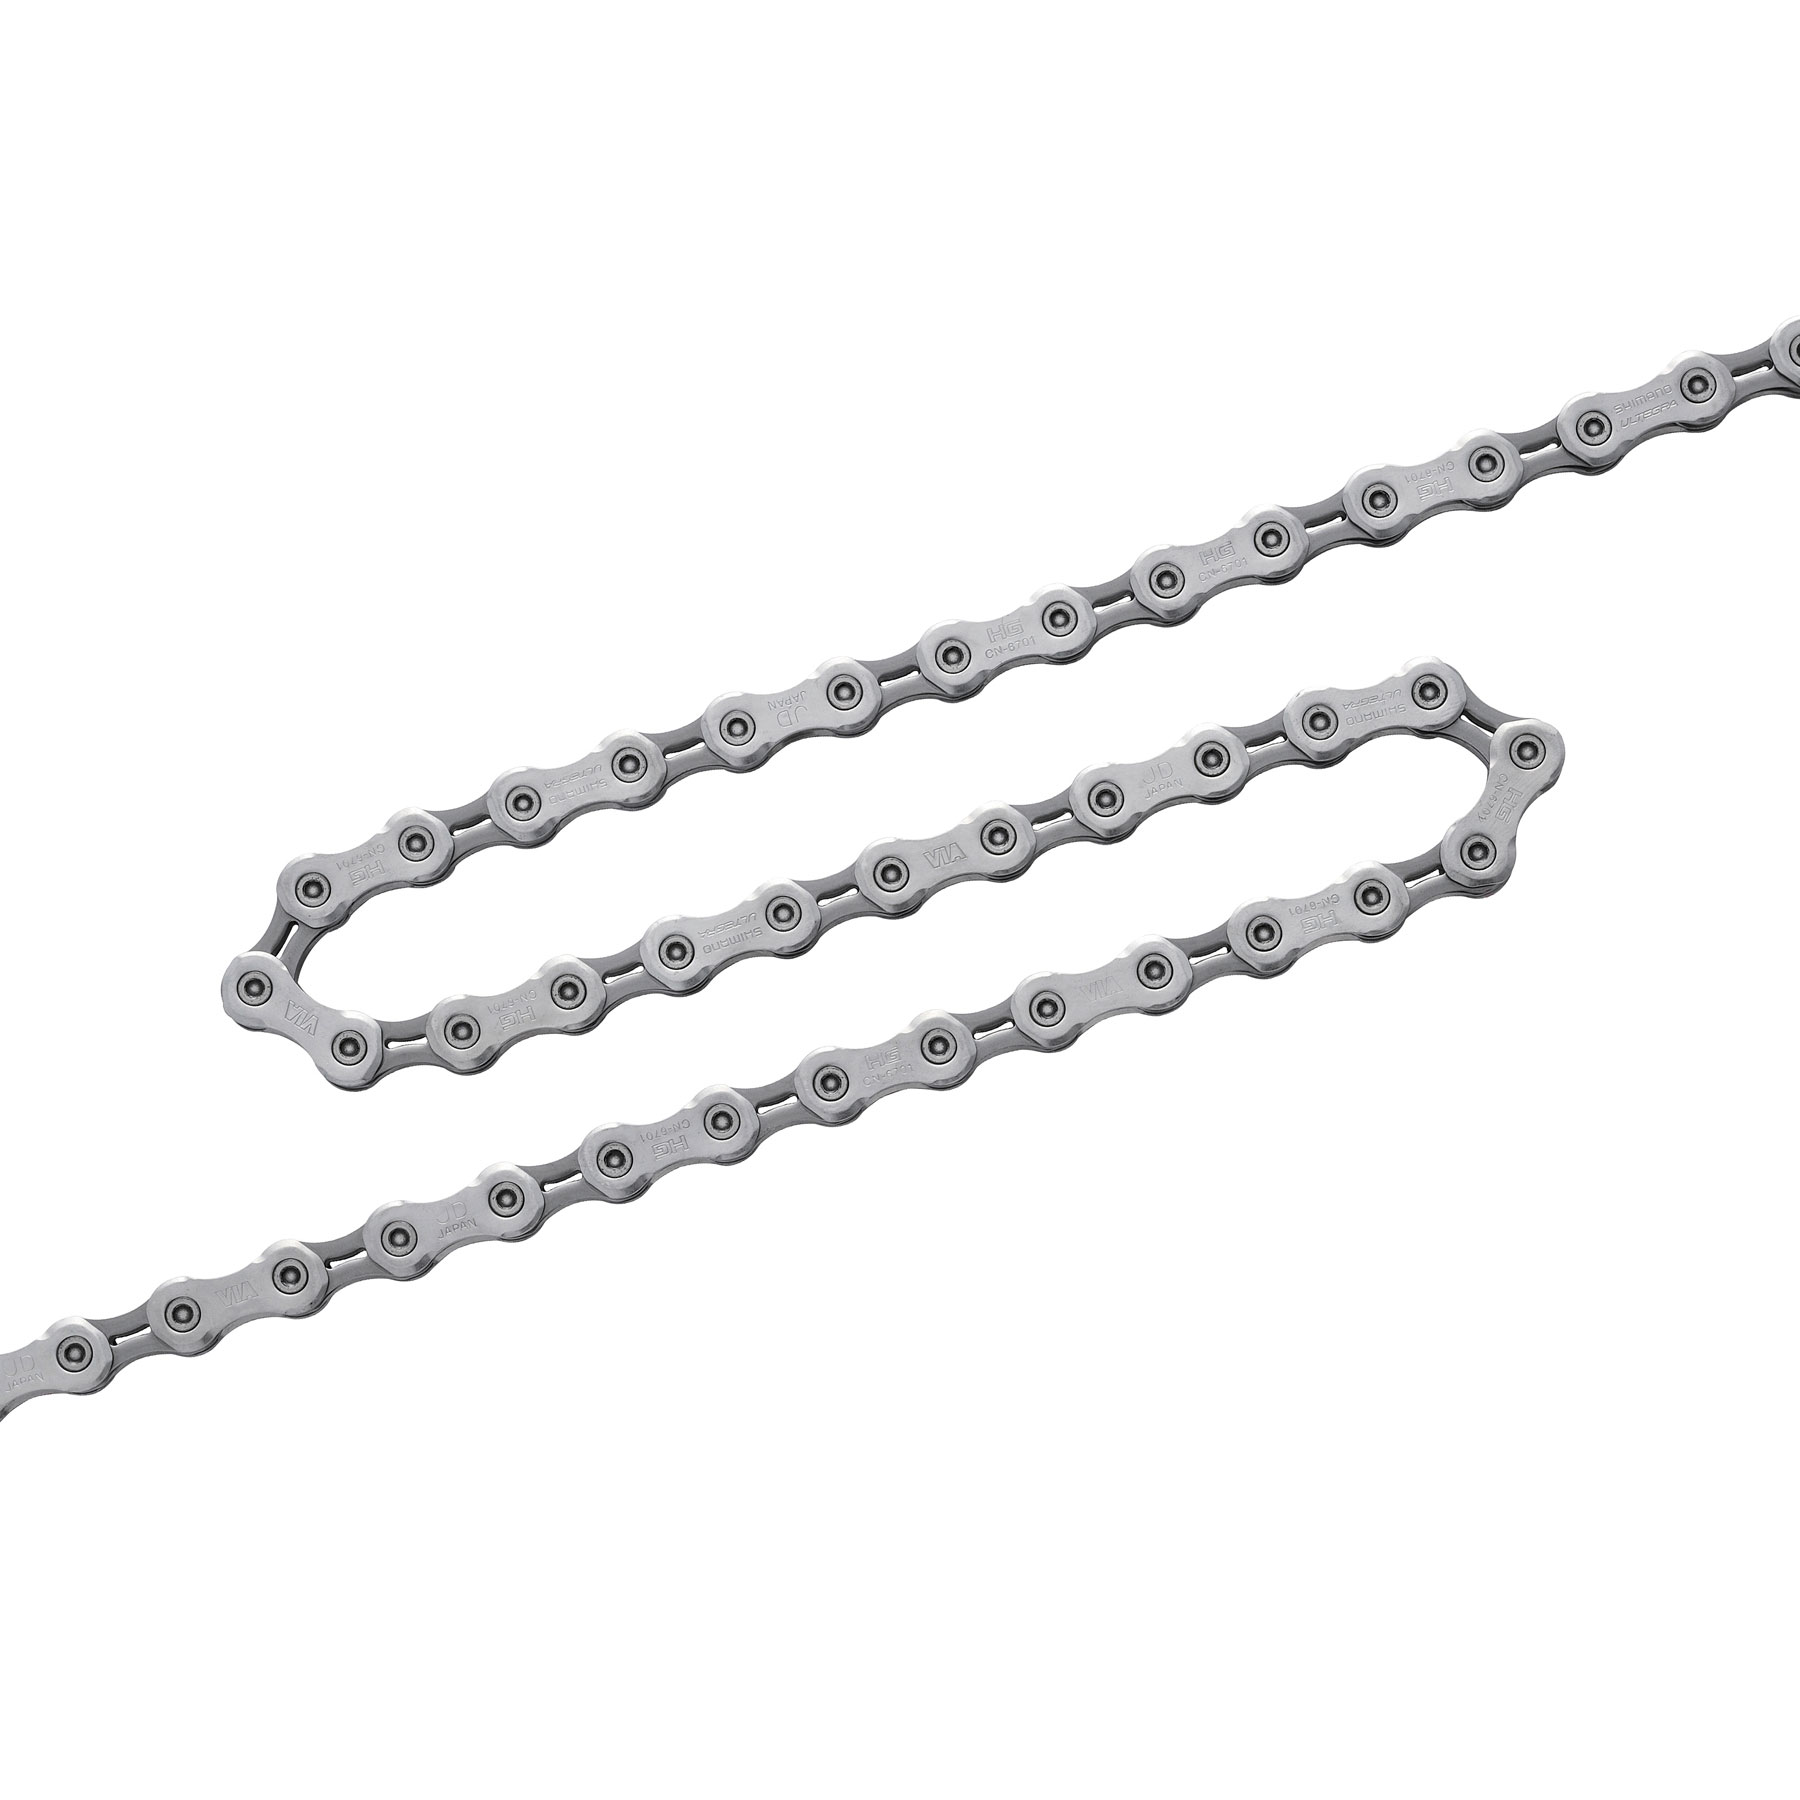 Picture of Shimano Ultegra CN-6701 Chain 10-speed - 114 links